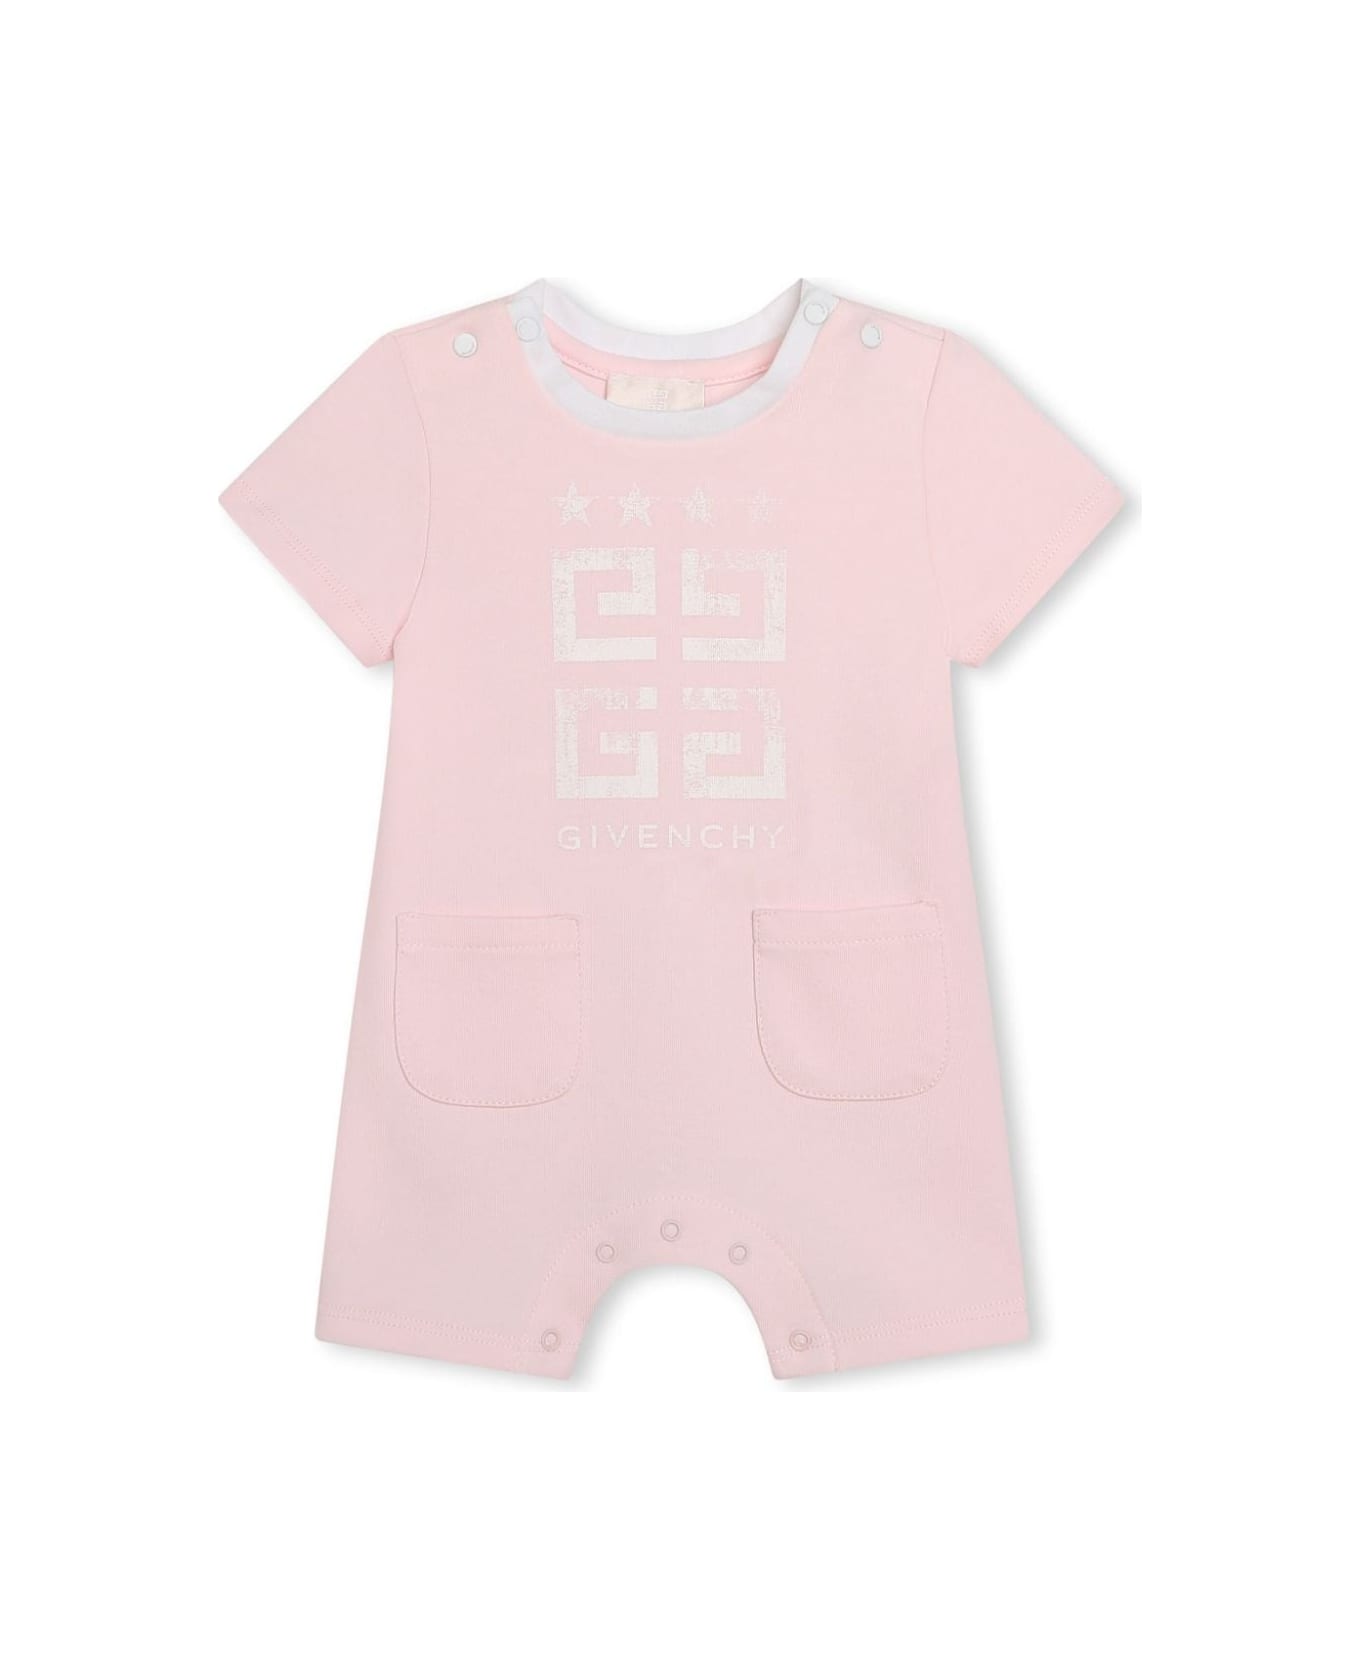 Givenchy Pink Playsuit With Givenchy 4g Print - Pink トップス